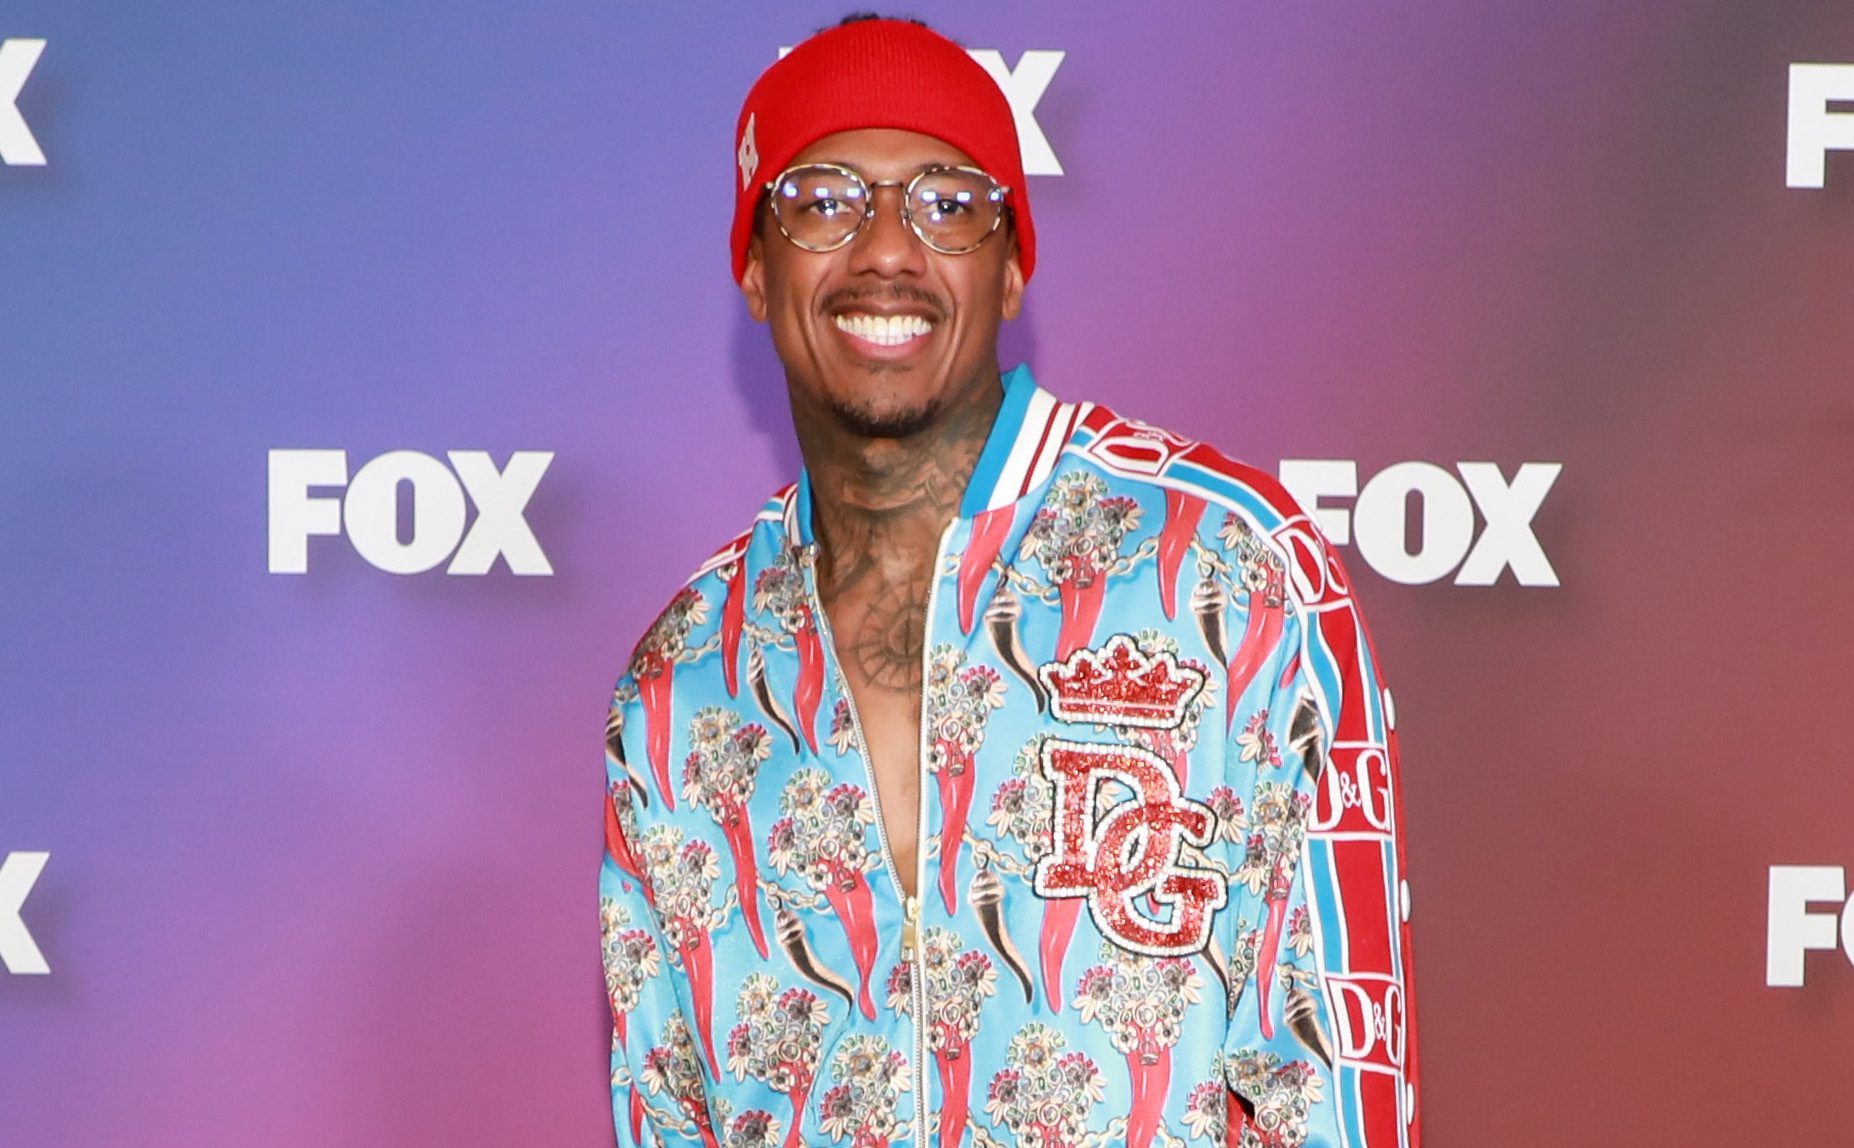 nick-cannon-reveals-he-spends-over-$3-million-on-his-children-annually-as-he-awaits-baby-number-12